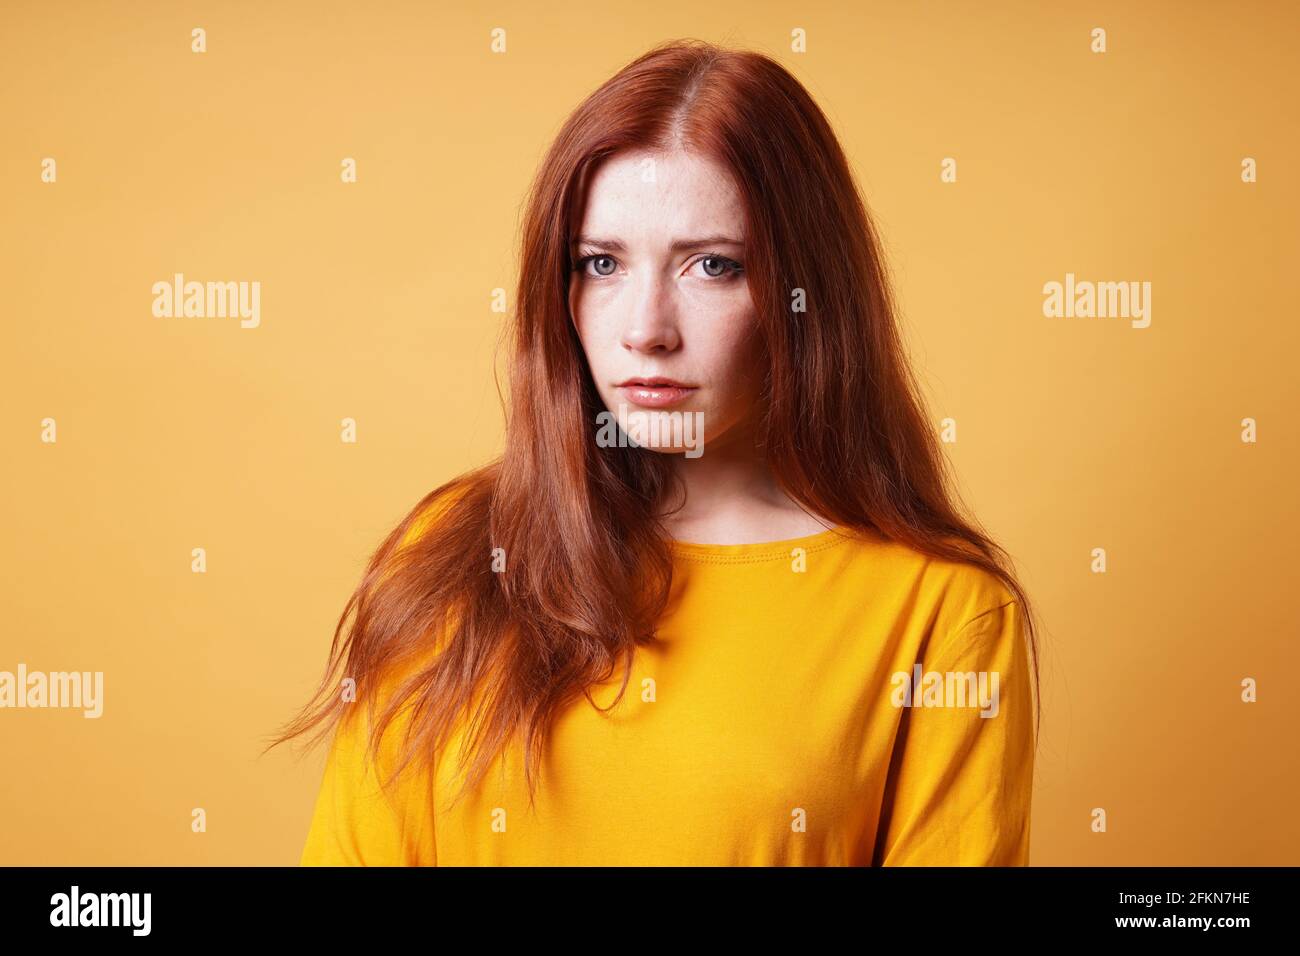 sad young woman looking worried and depressed Stock Photo